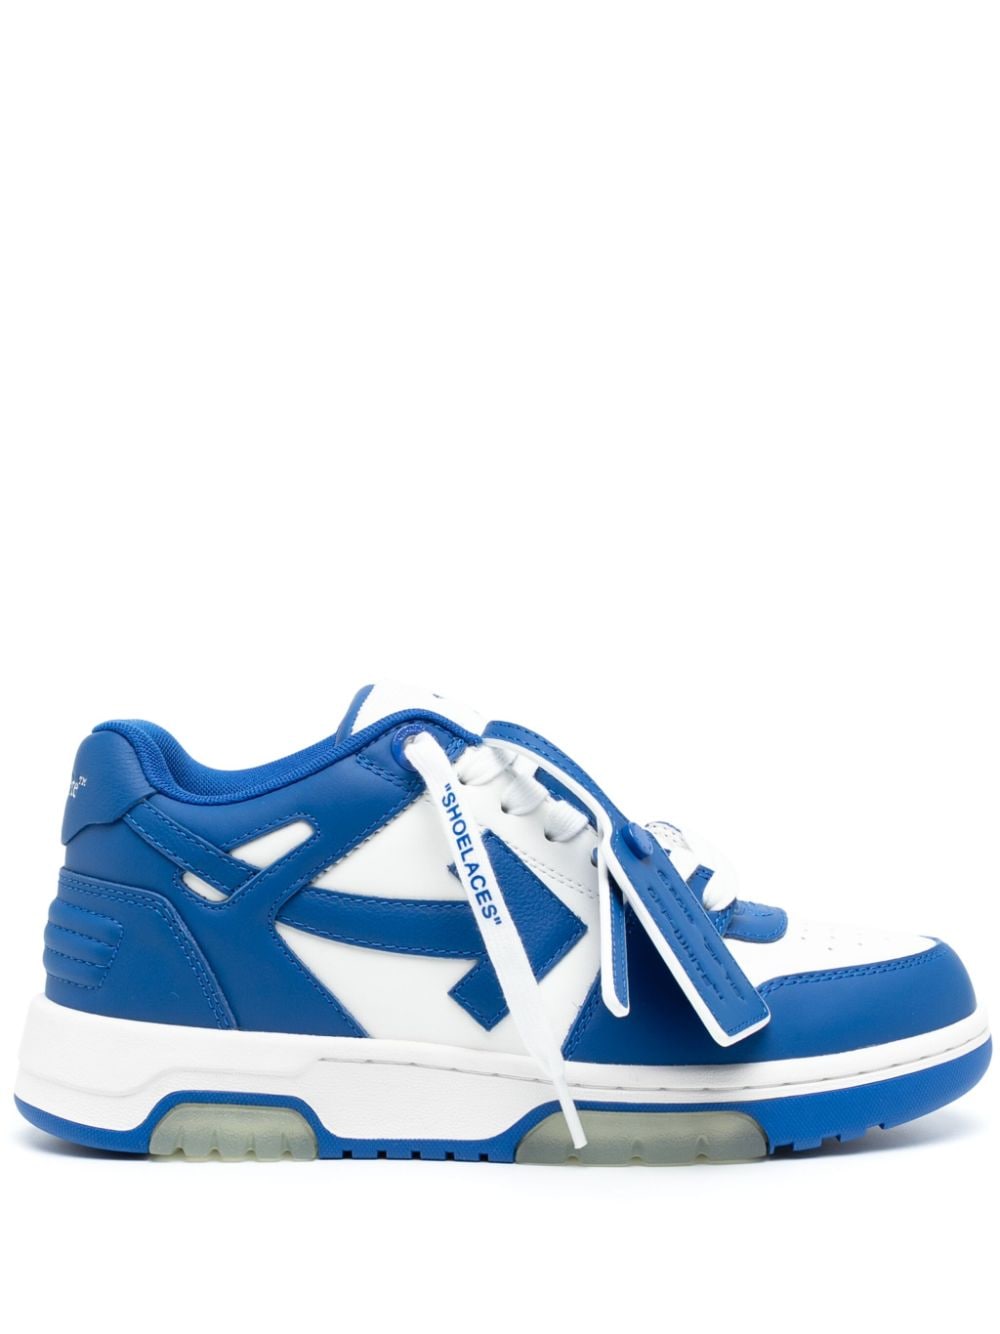 Off-White Out of Office OOO Sneakers - Blau von Off-White